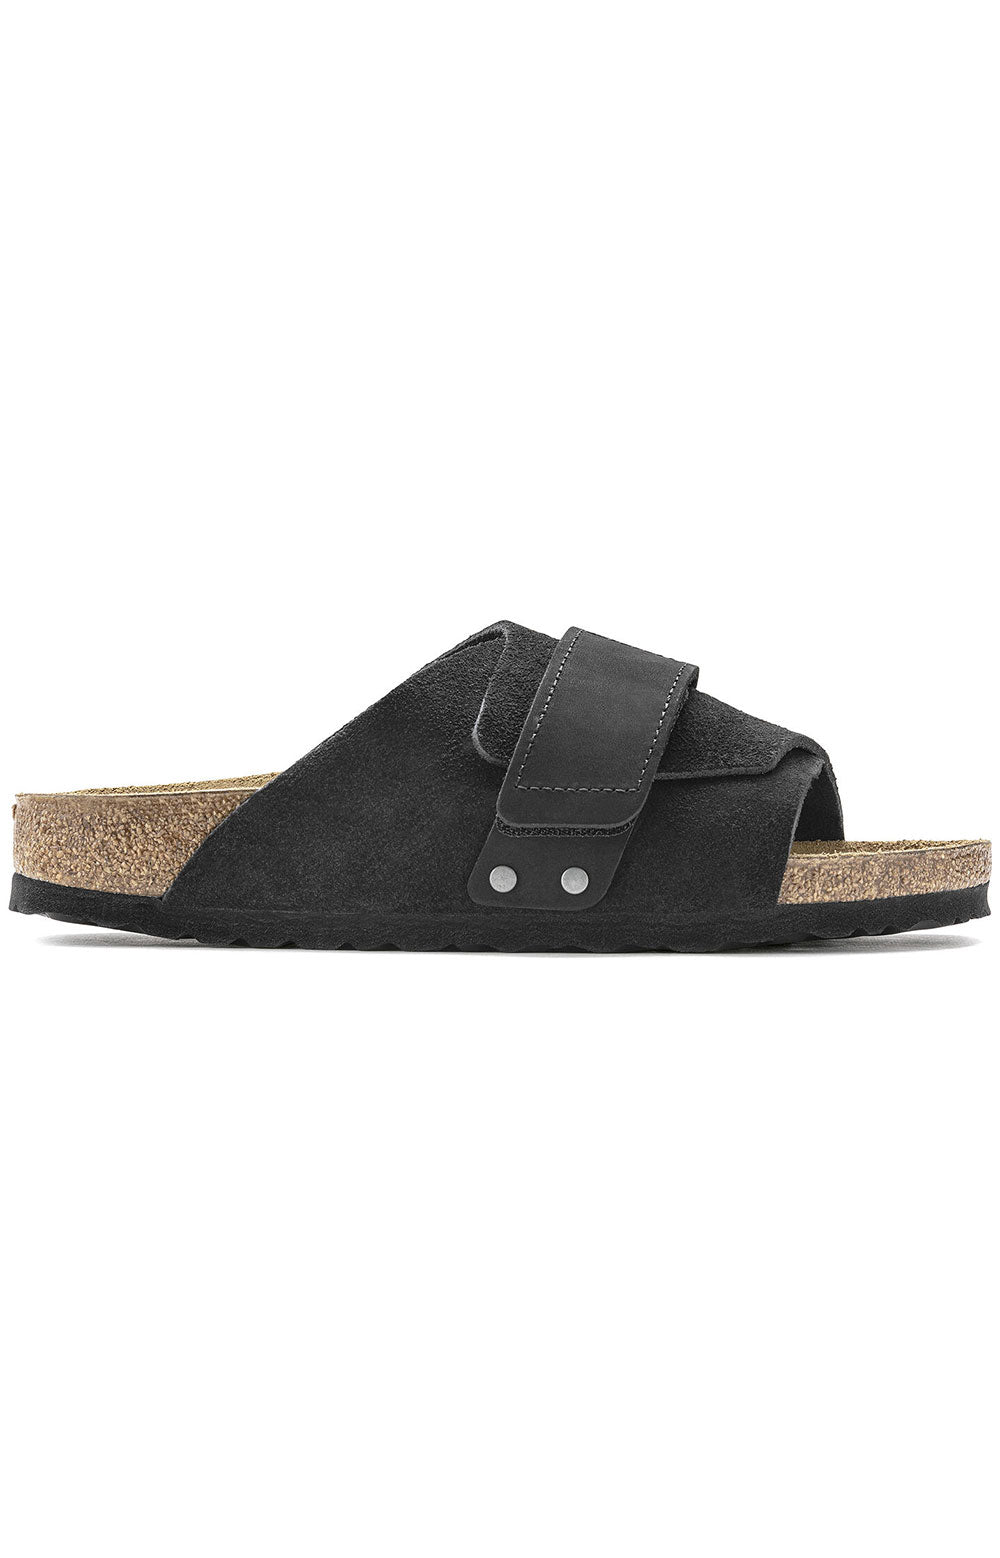 Stylish and versatile black sandals from Kyoto, featuring a classic design and durable construction